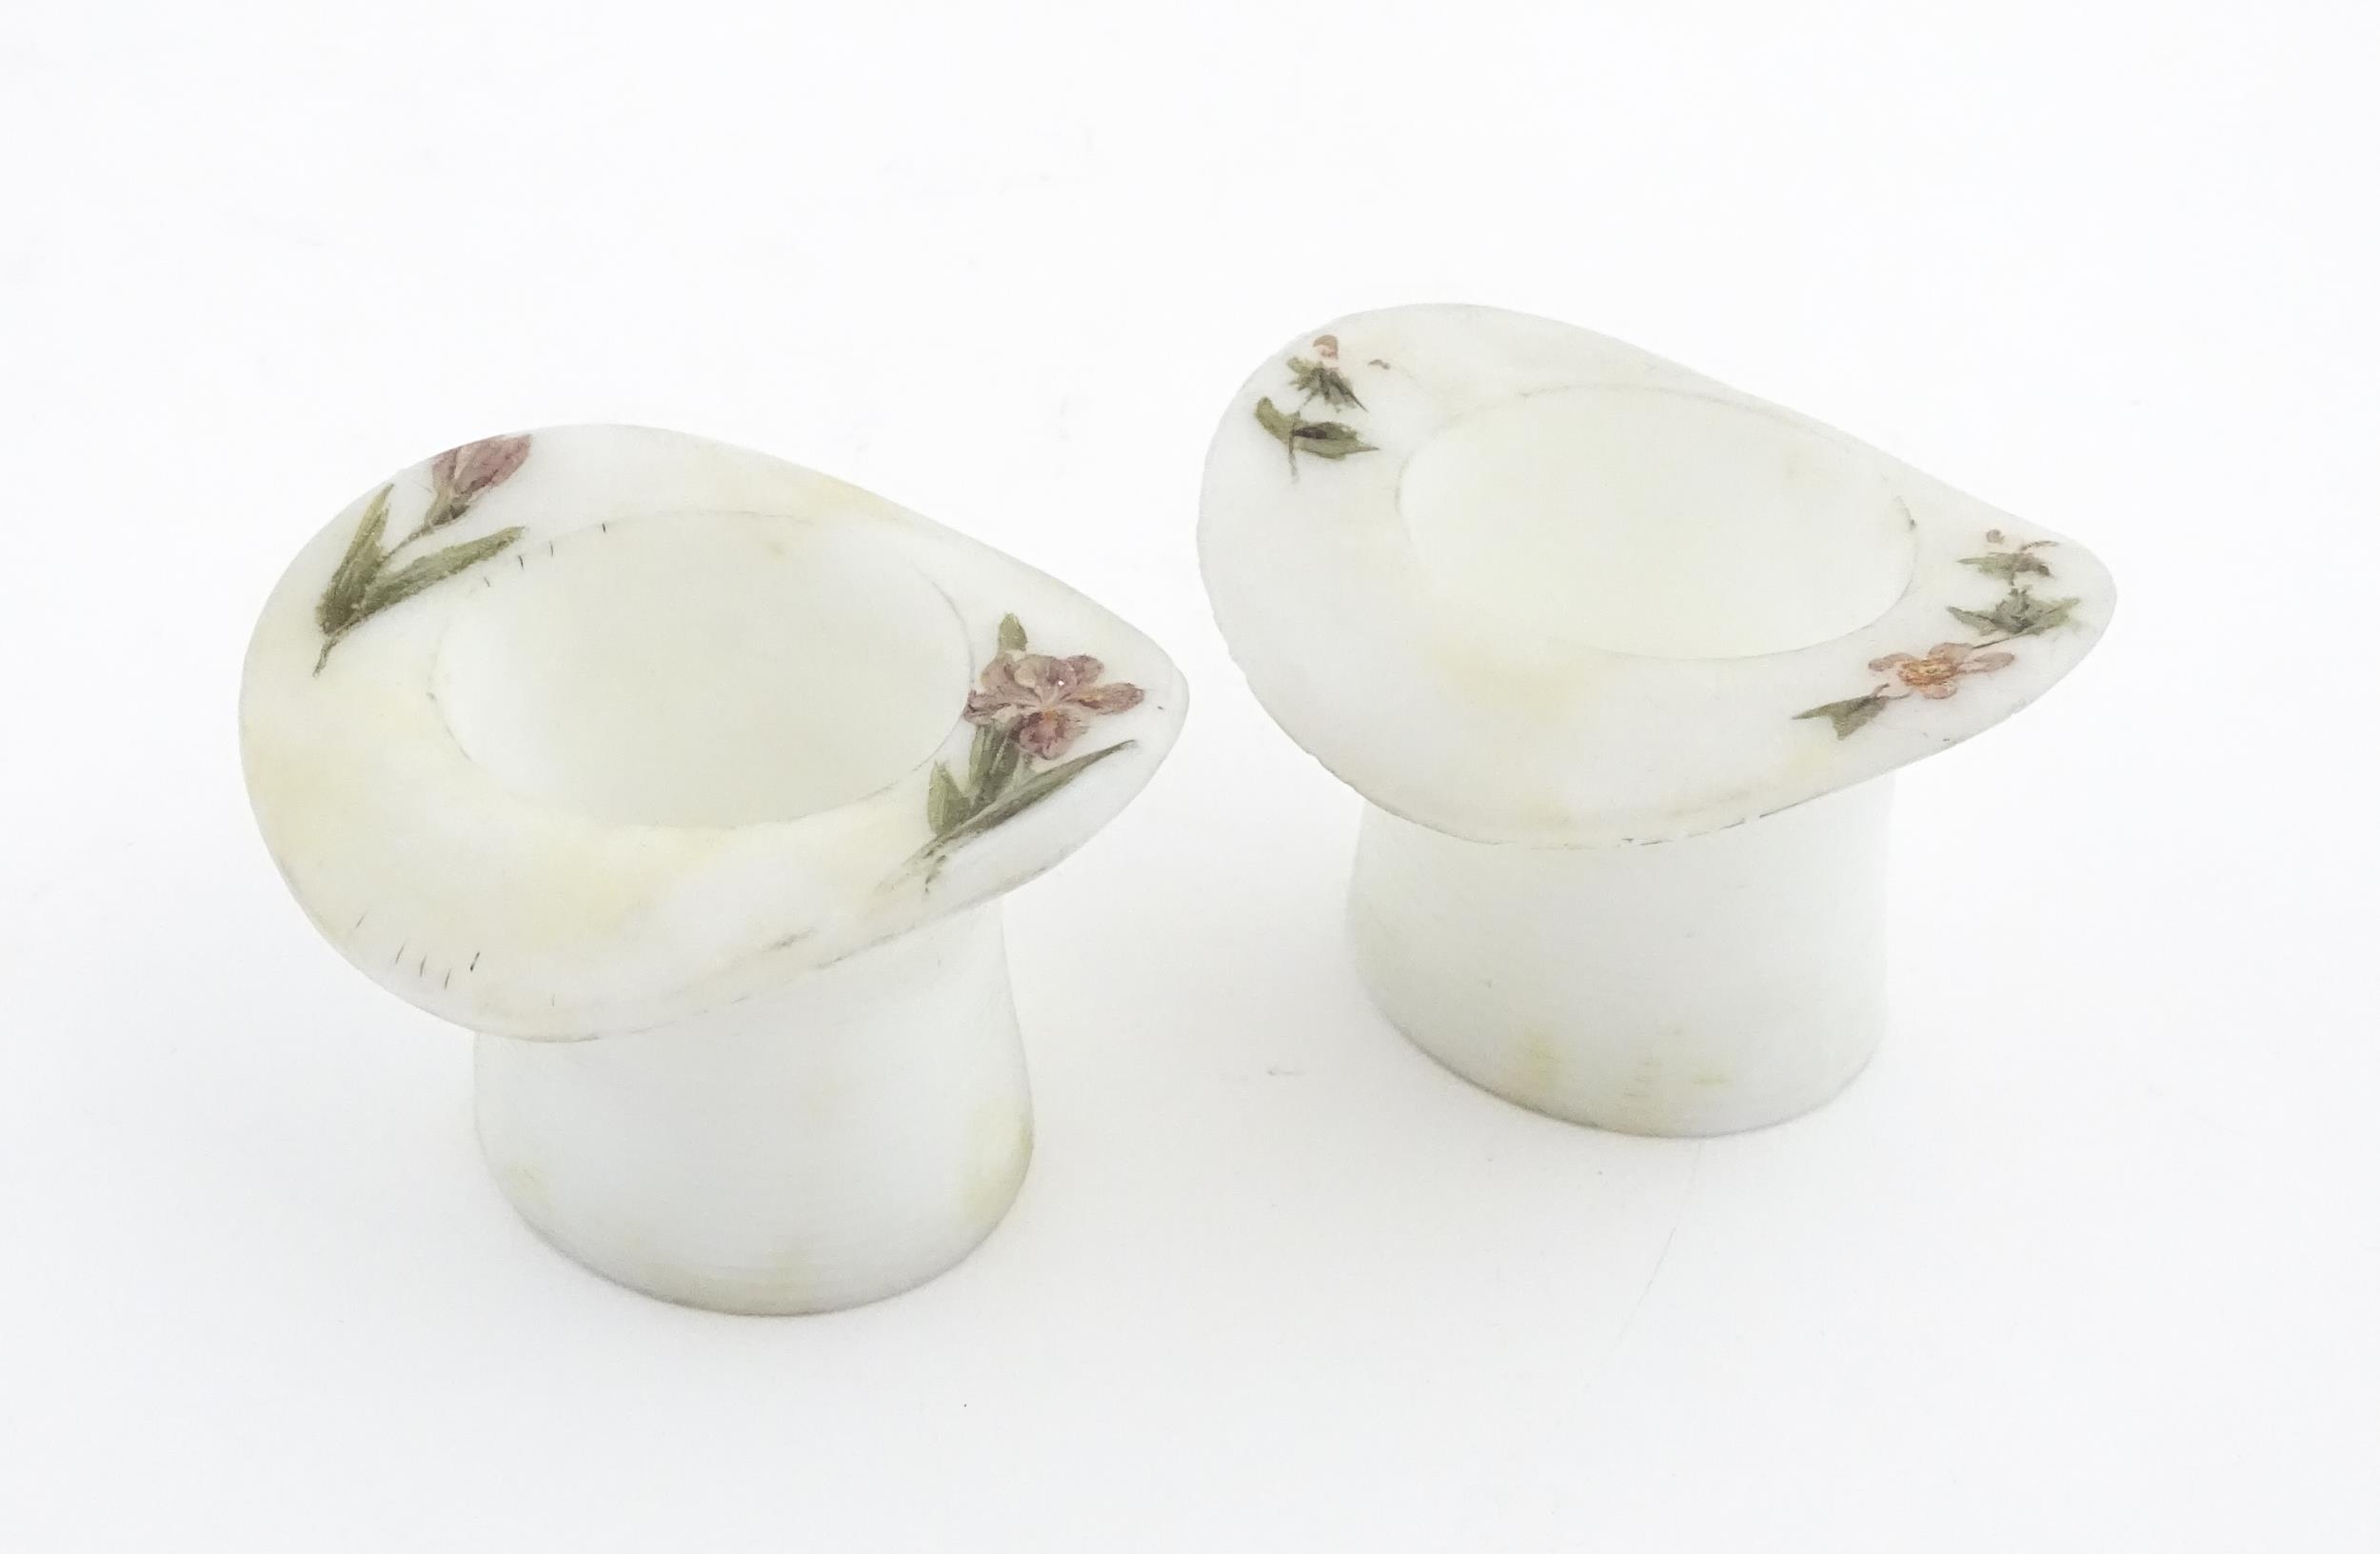 A pair of milk glass match holders / vesta keeps formed as top hats with hand painted floral detail. - Image 4 of 13